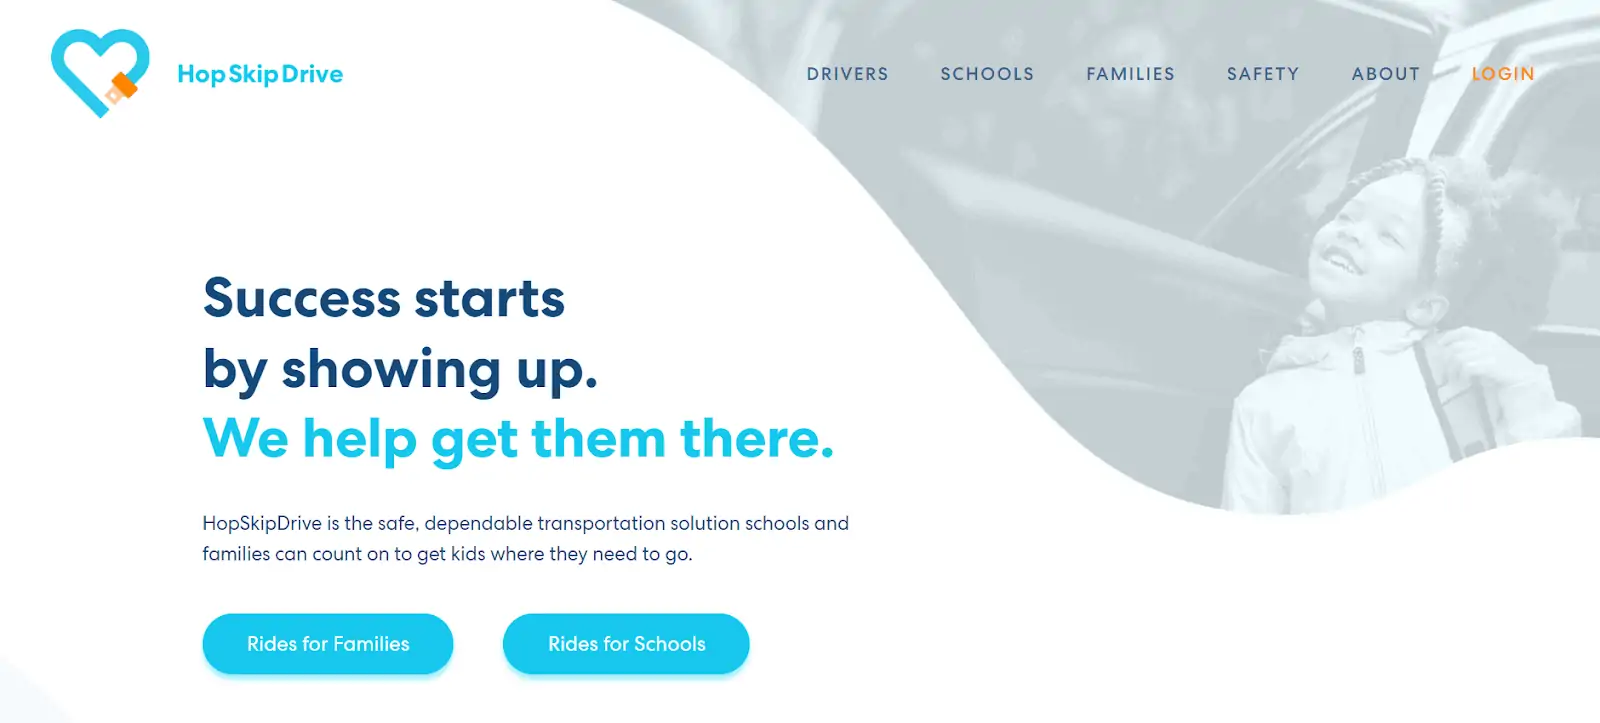 HopSkipDrive is considered an Uber for kids service